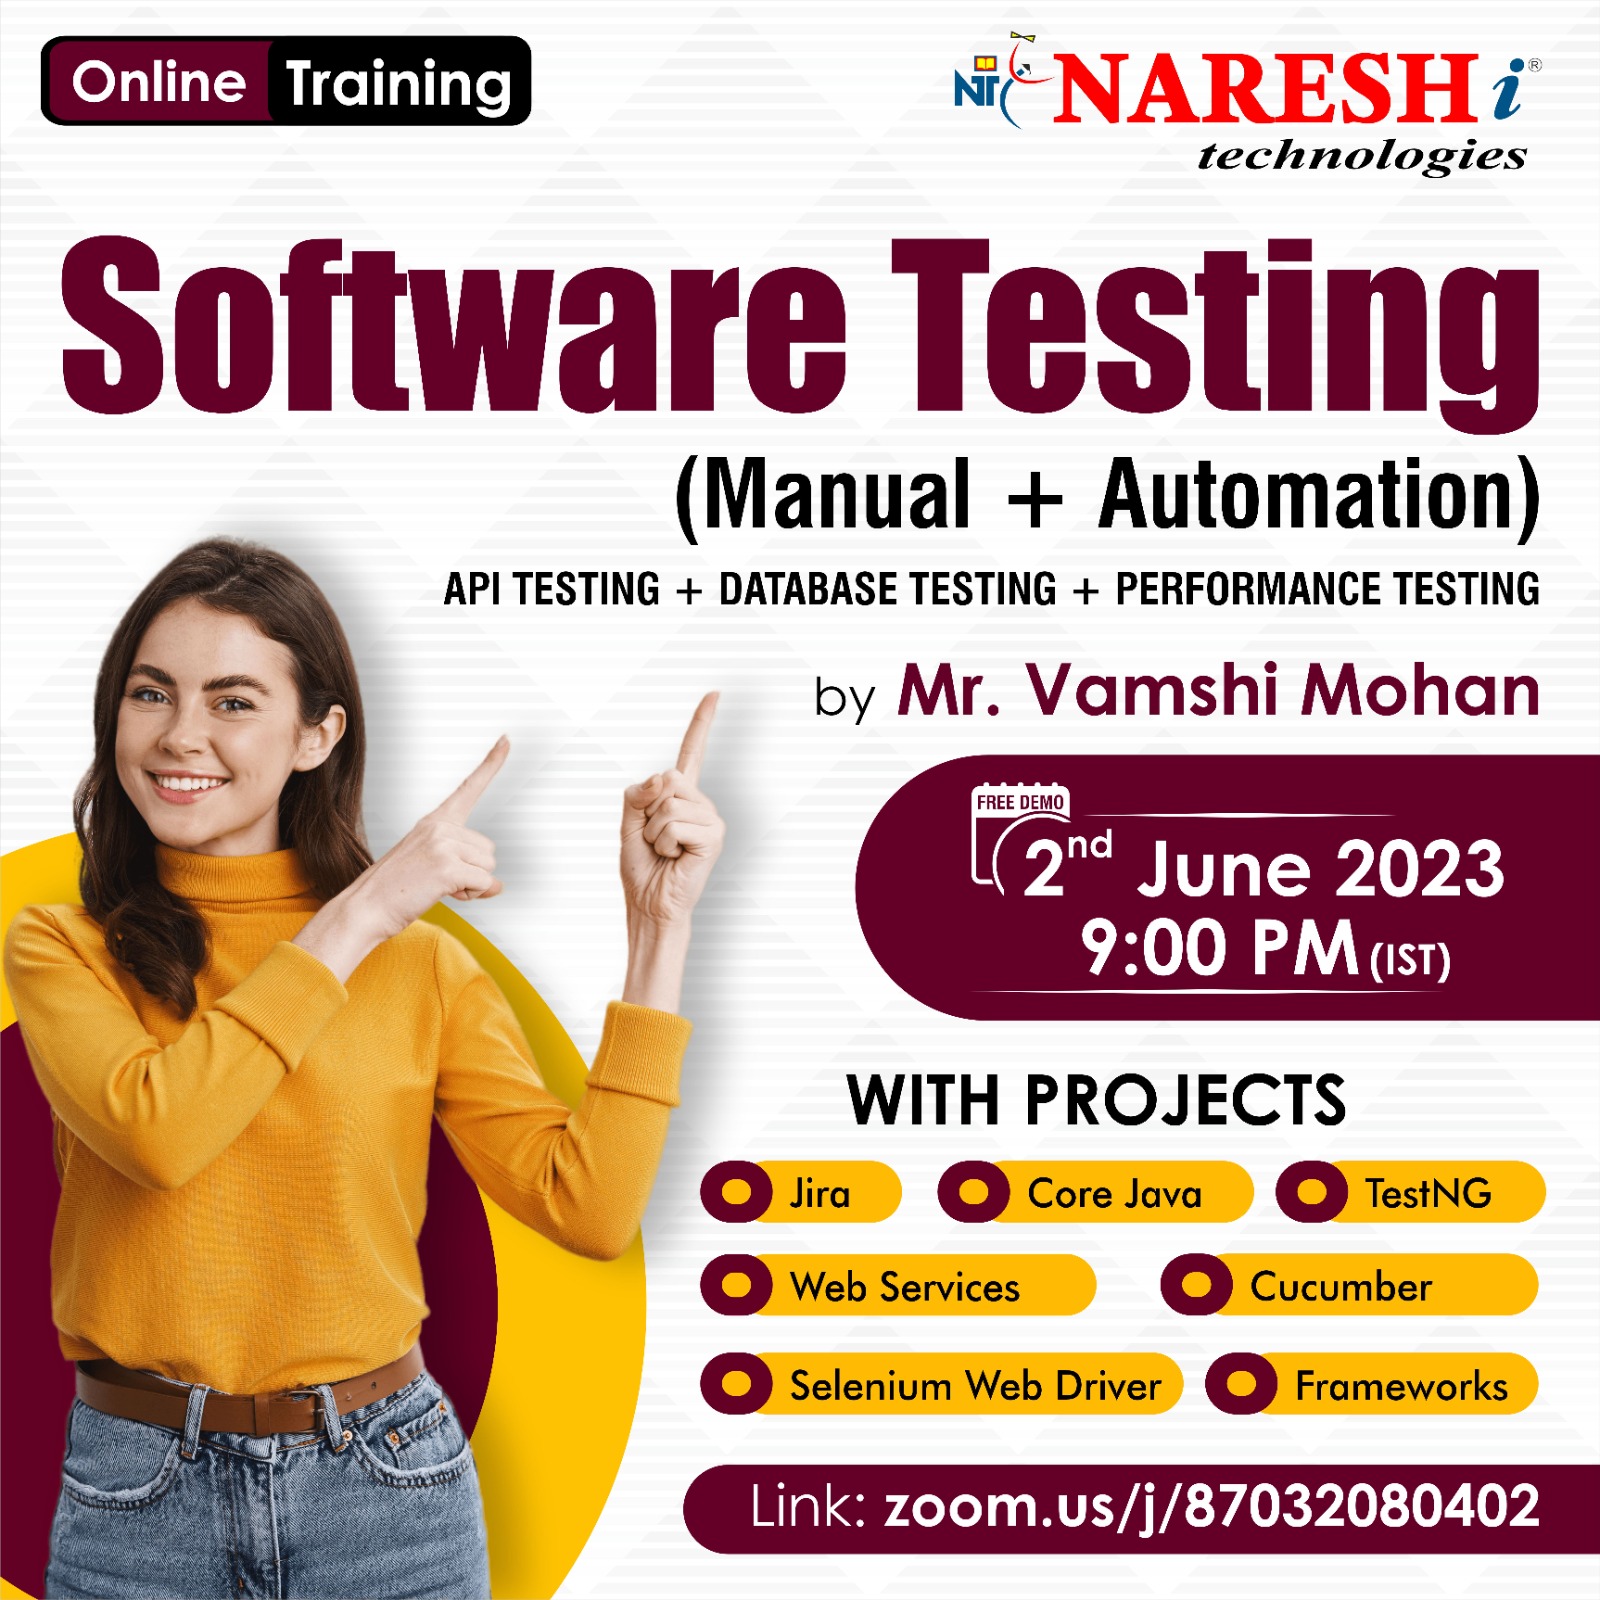 Free Demo On Software Testing By Mr. Vamshi Mohan in NareshIT - 8179191999, Online Event